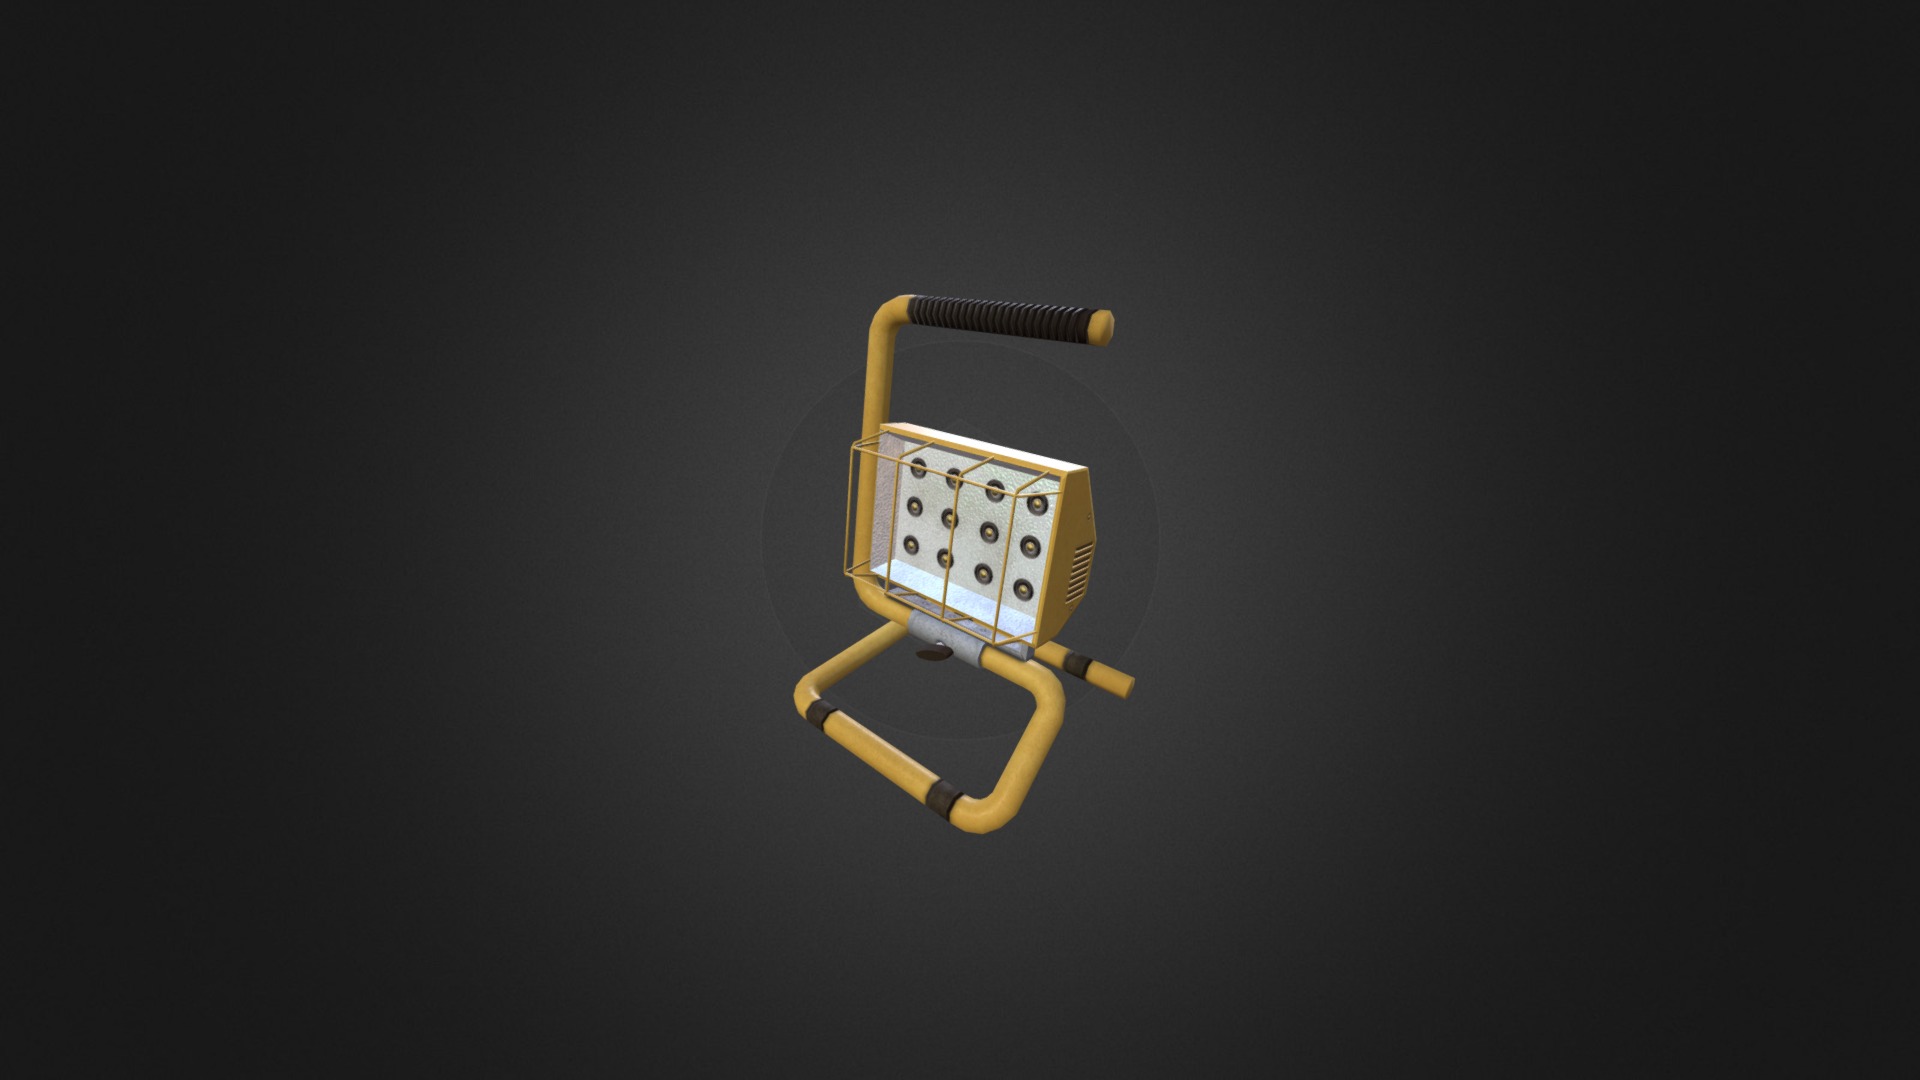 3D model Portable Work Light - This is a 3D model of the Portable Work Light. The 3D model is about a yellow and white electrical device.